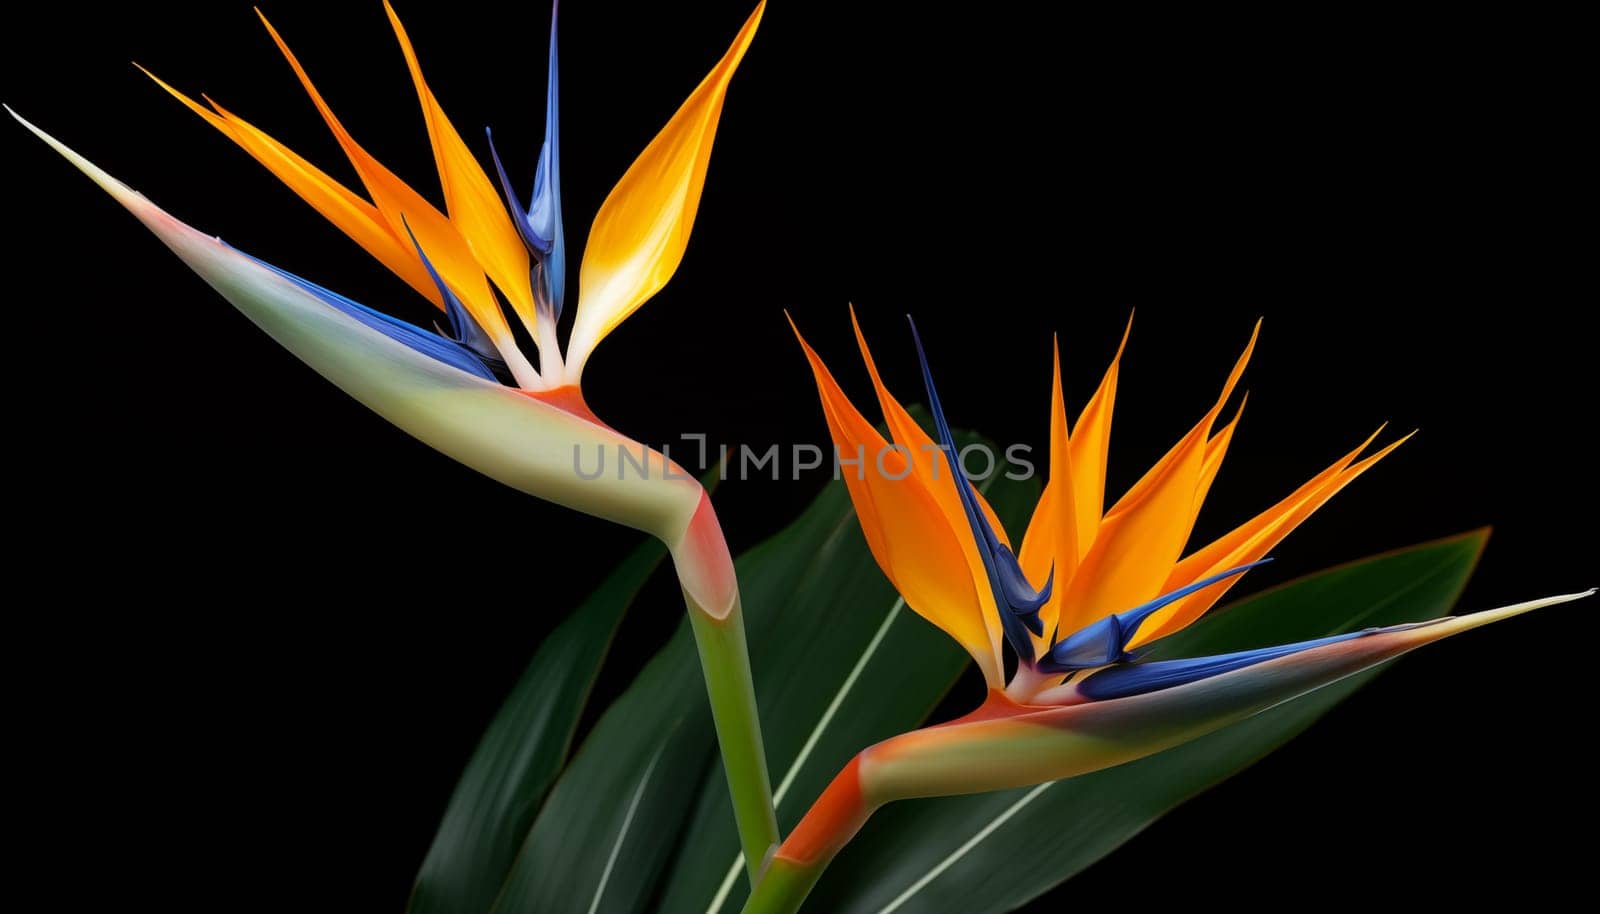 A Bird of Paradise plant featuring its unique orange by Nadtochiy